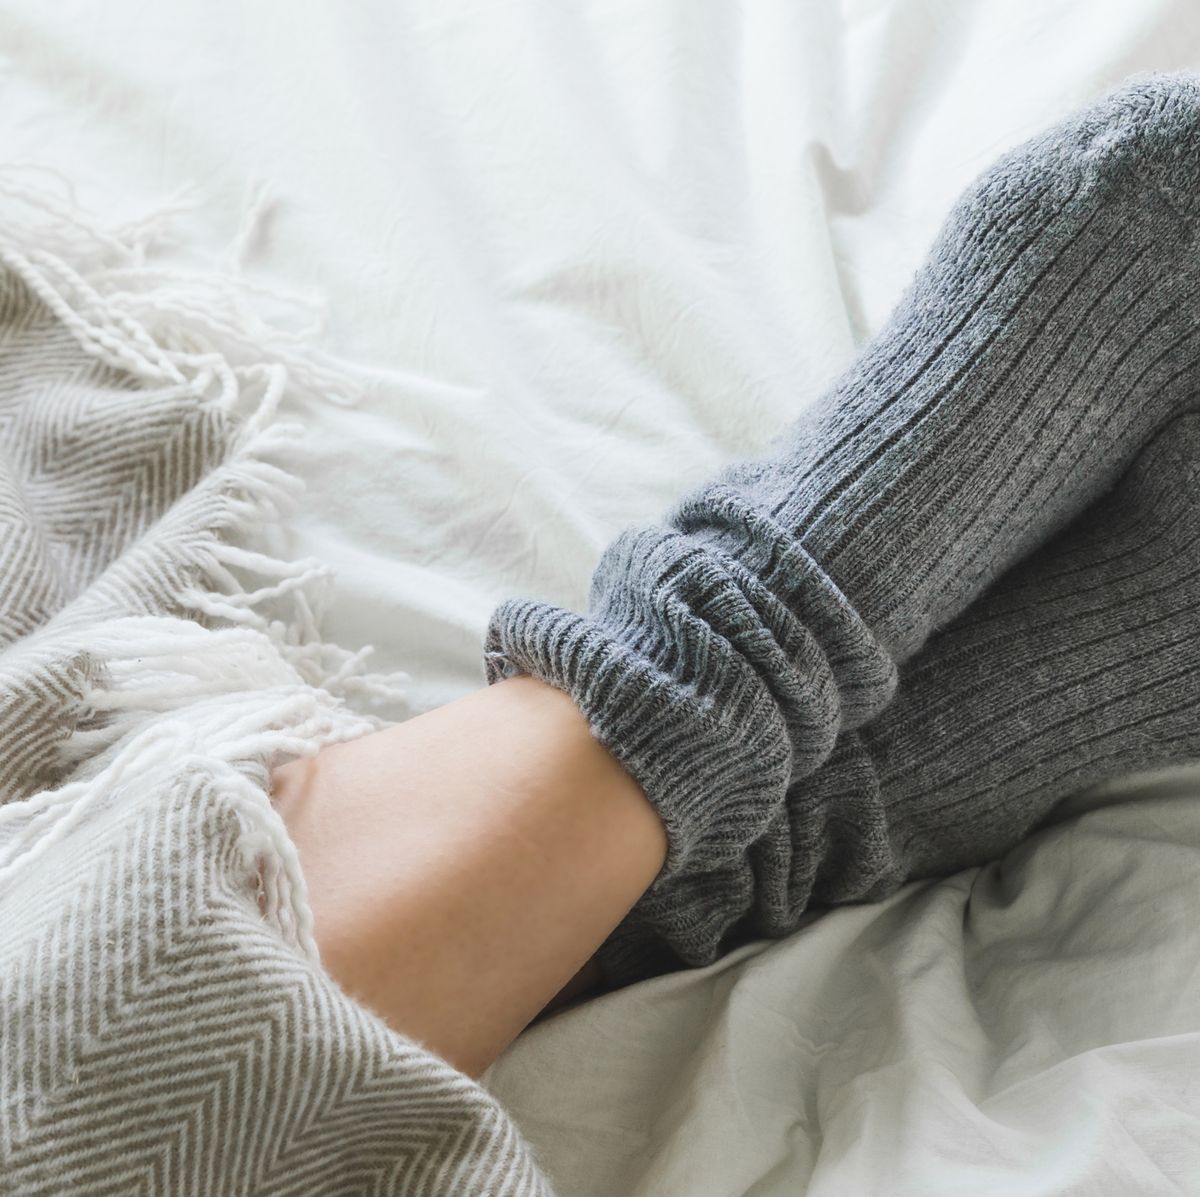 Why My Feet Always Cold? 9 Causes and